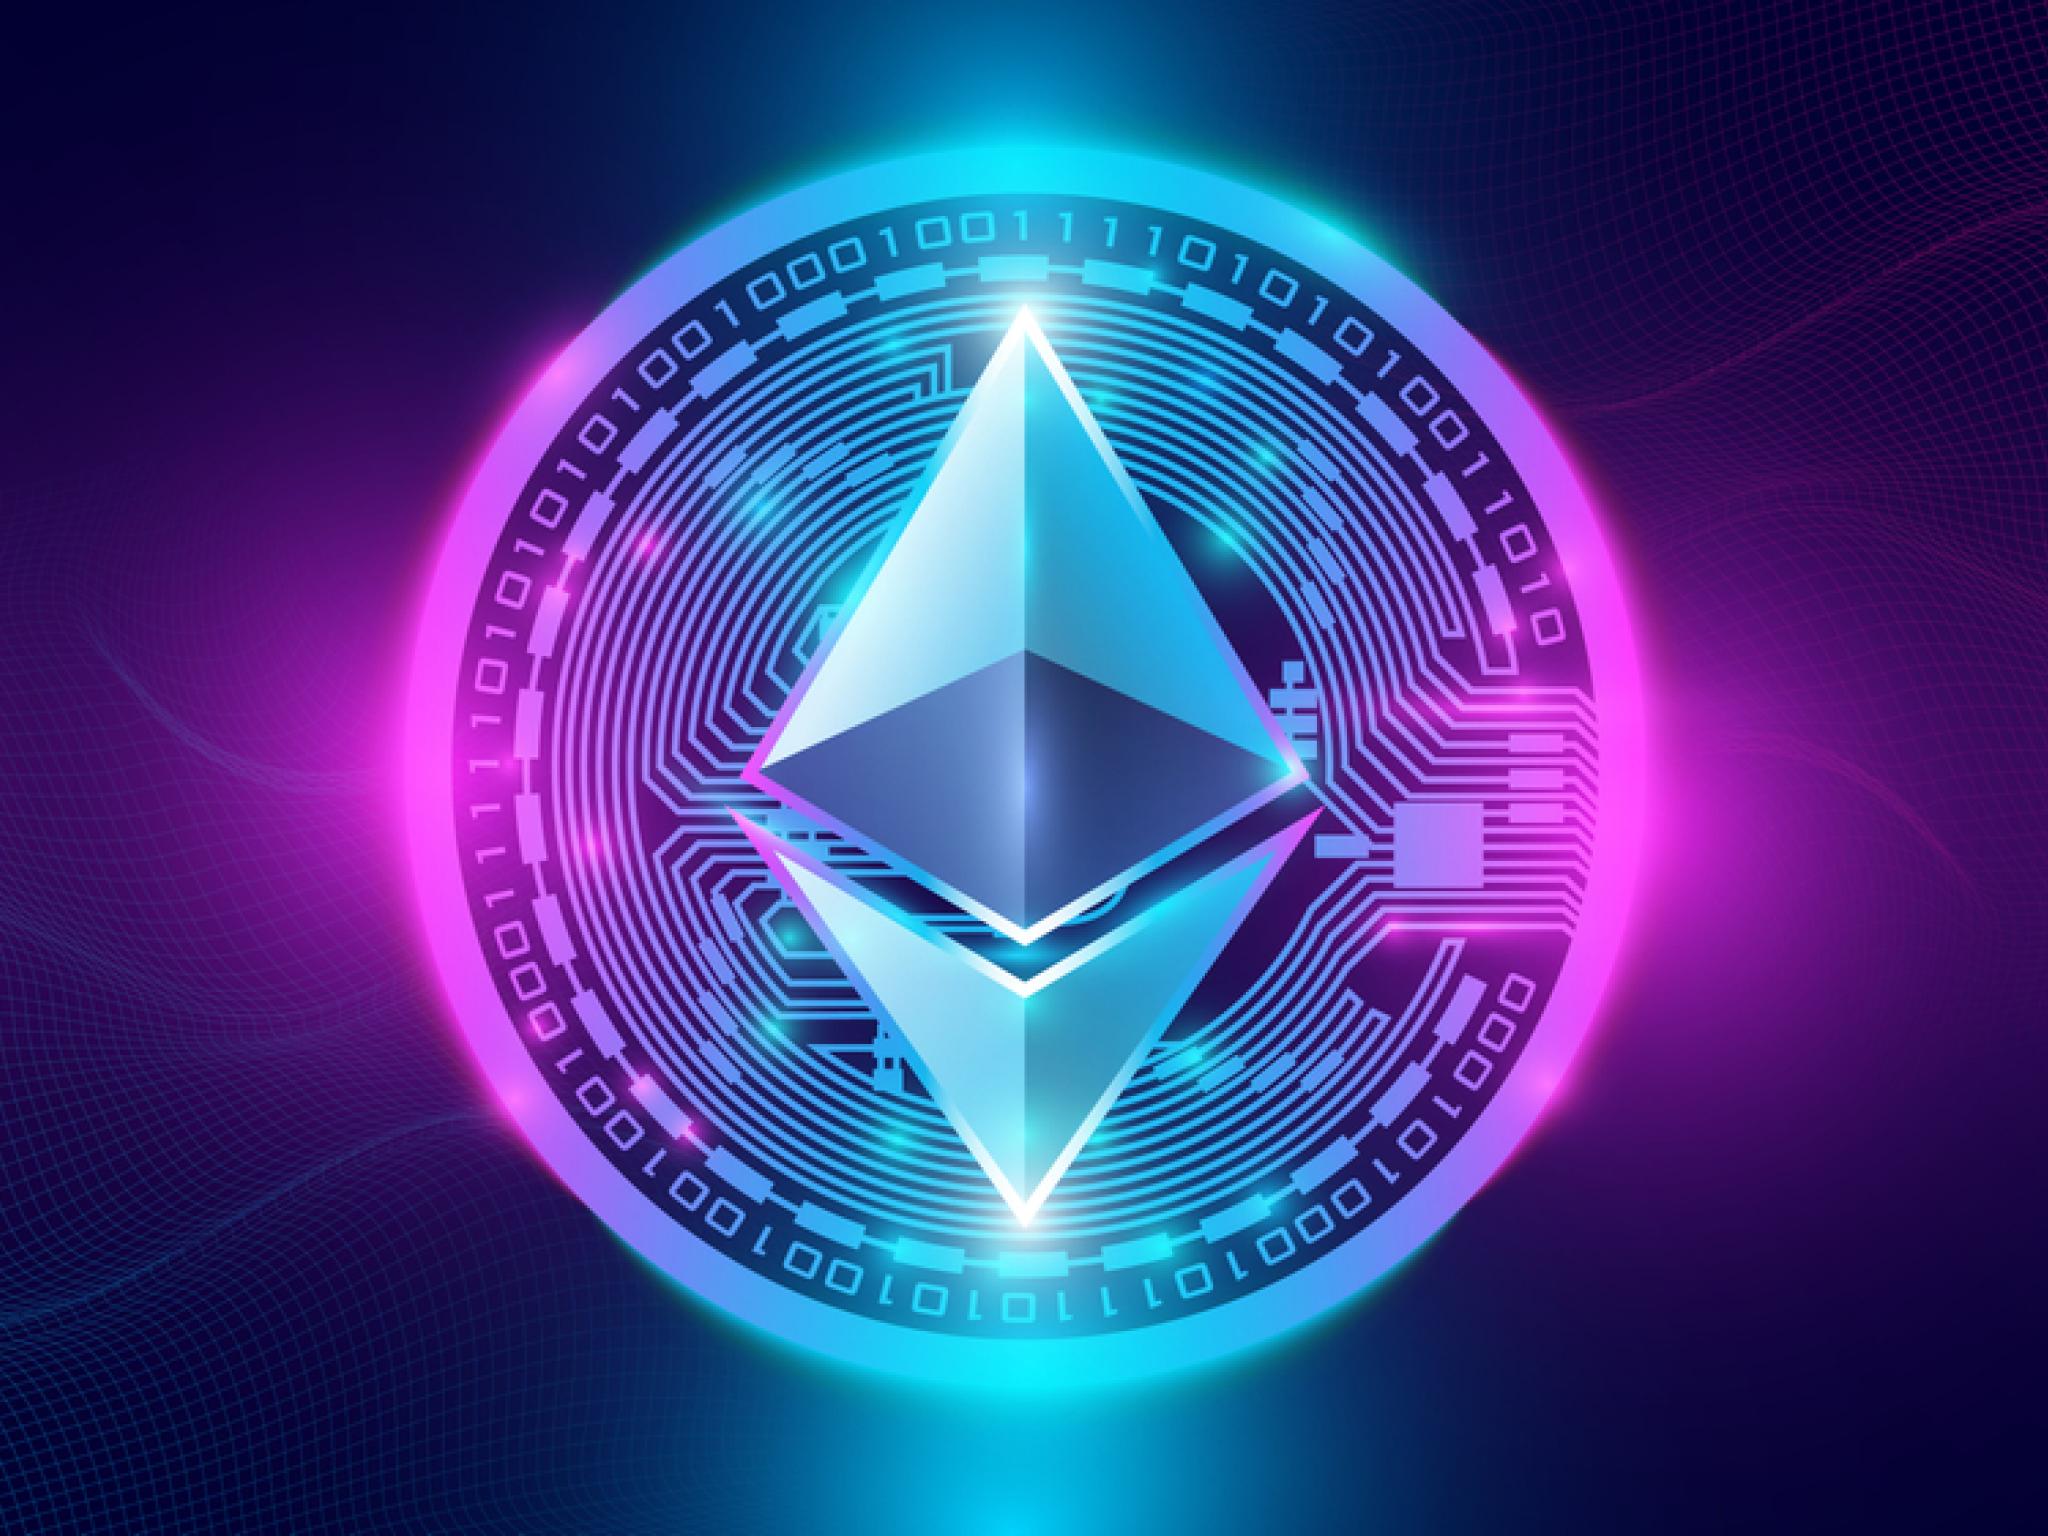  ethereum-rises-20-futures-open-interest-hits-record-15b-as-etf-approval-odds-jump-to-75 